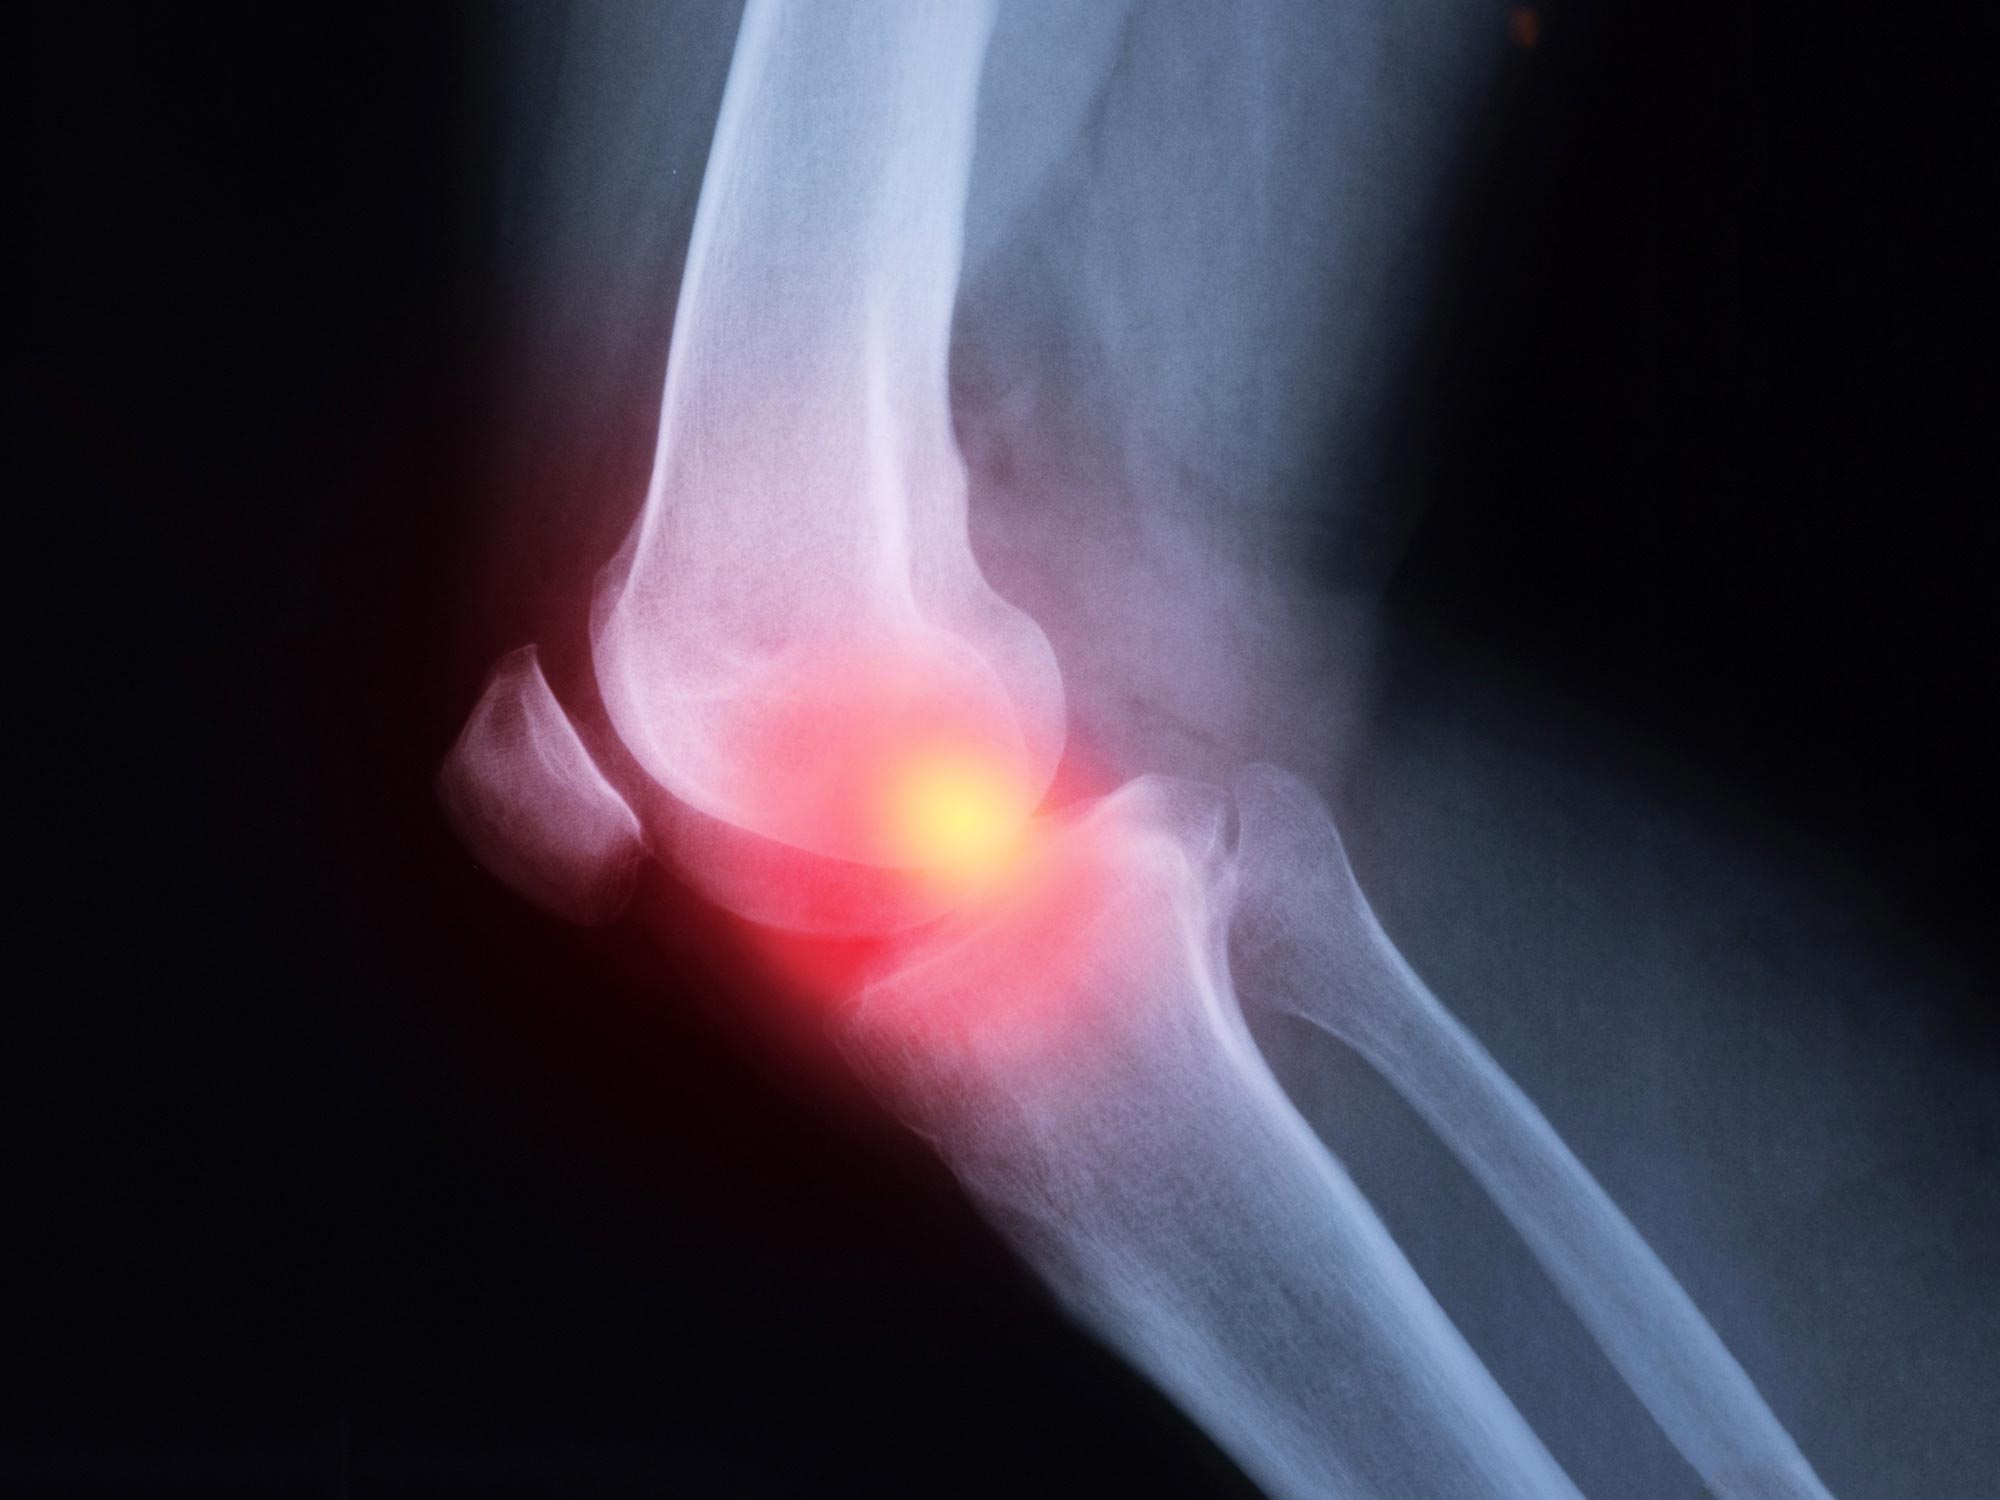 Pain Relievers Like Ibuprofen and Naproxen May Worsen Arthritis Inflammation – SciTechDaily